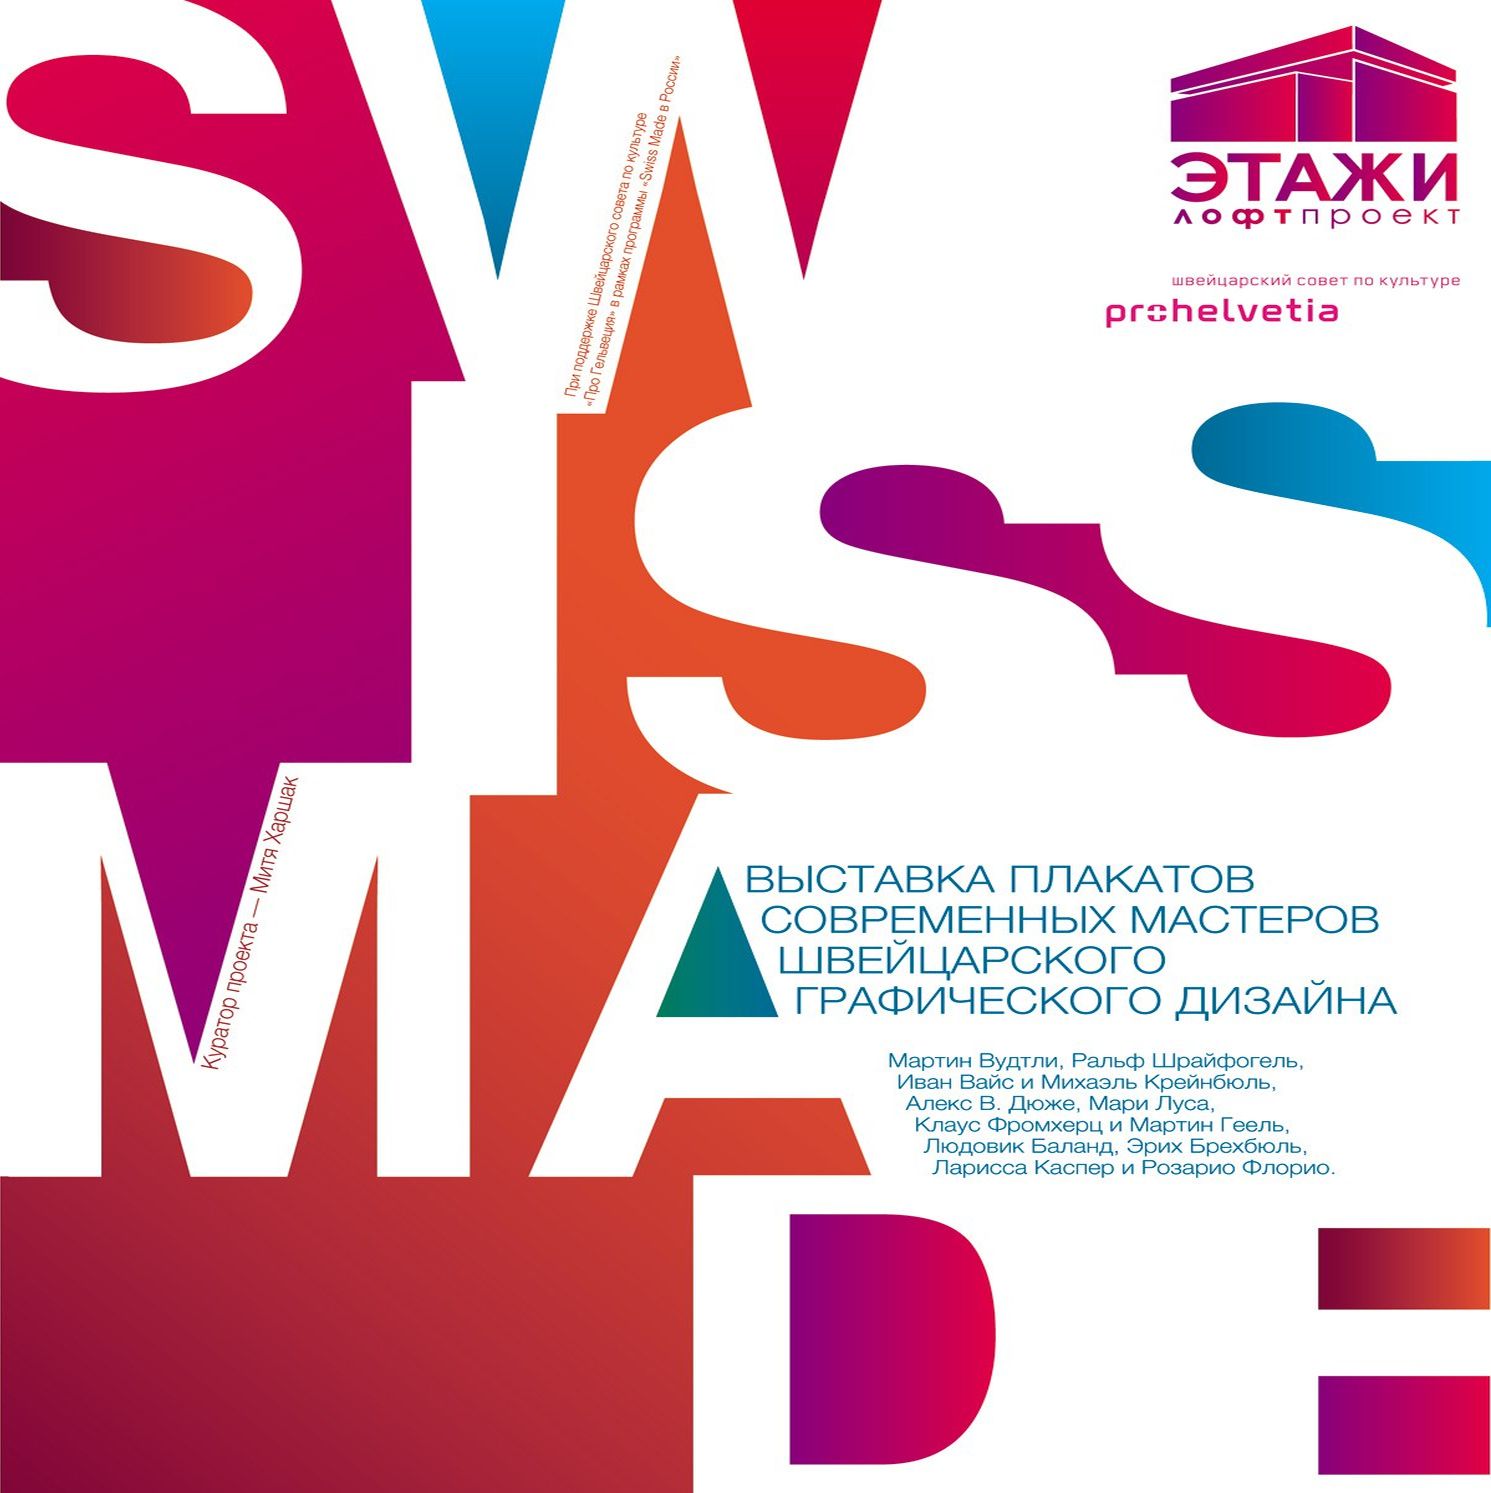 Exhibition of Swiss poster «SWISS MADE»